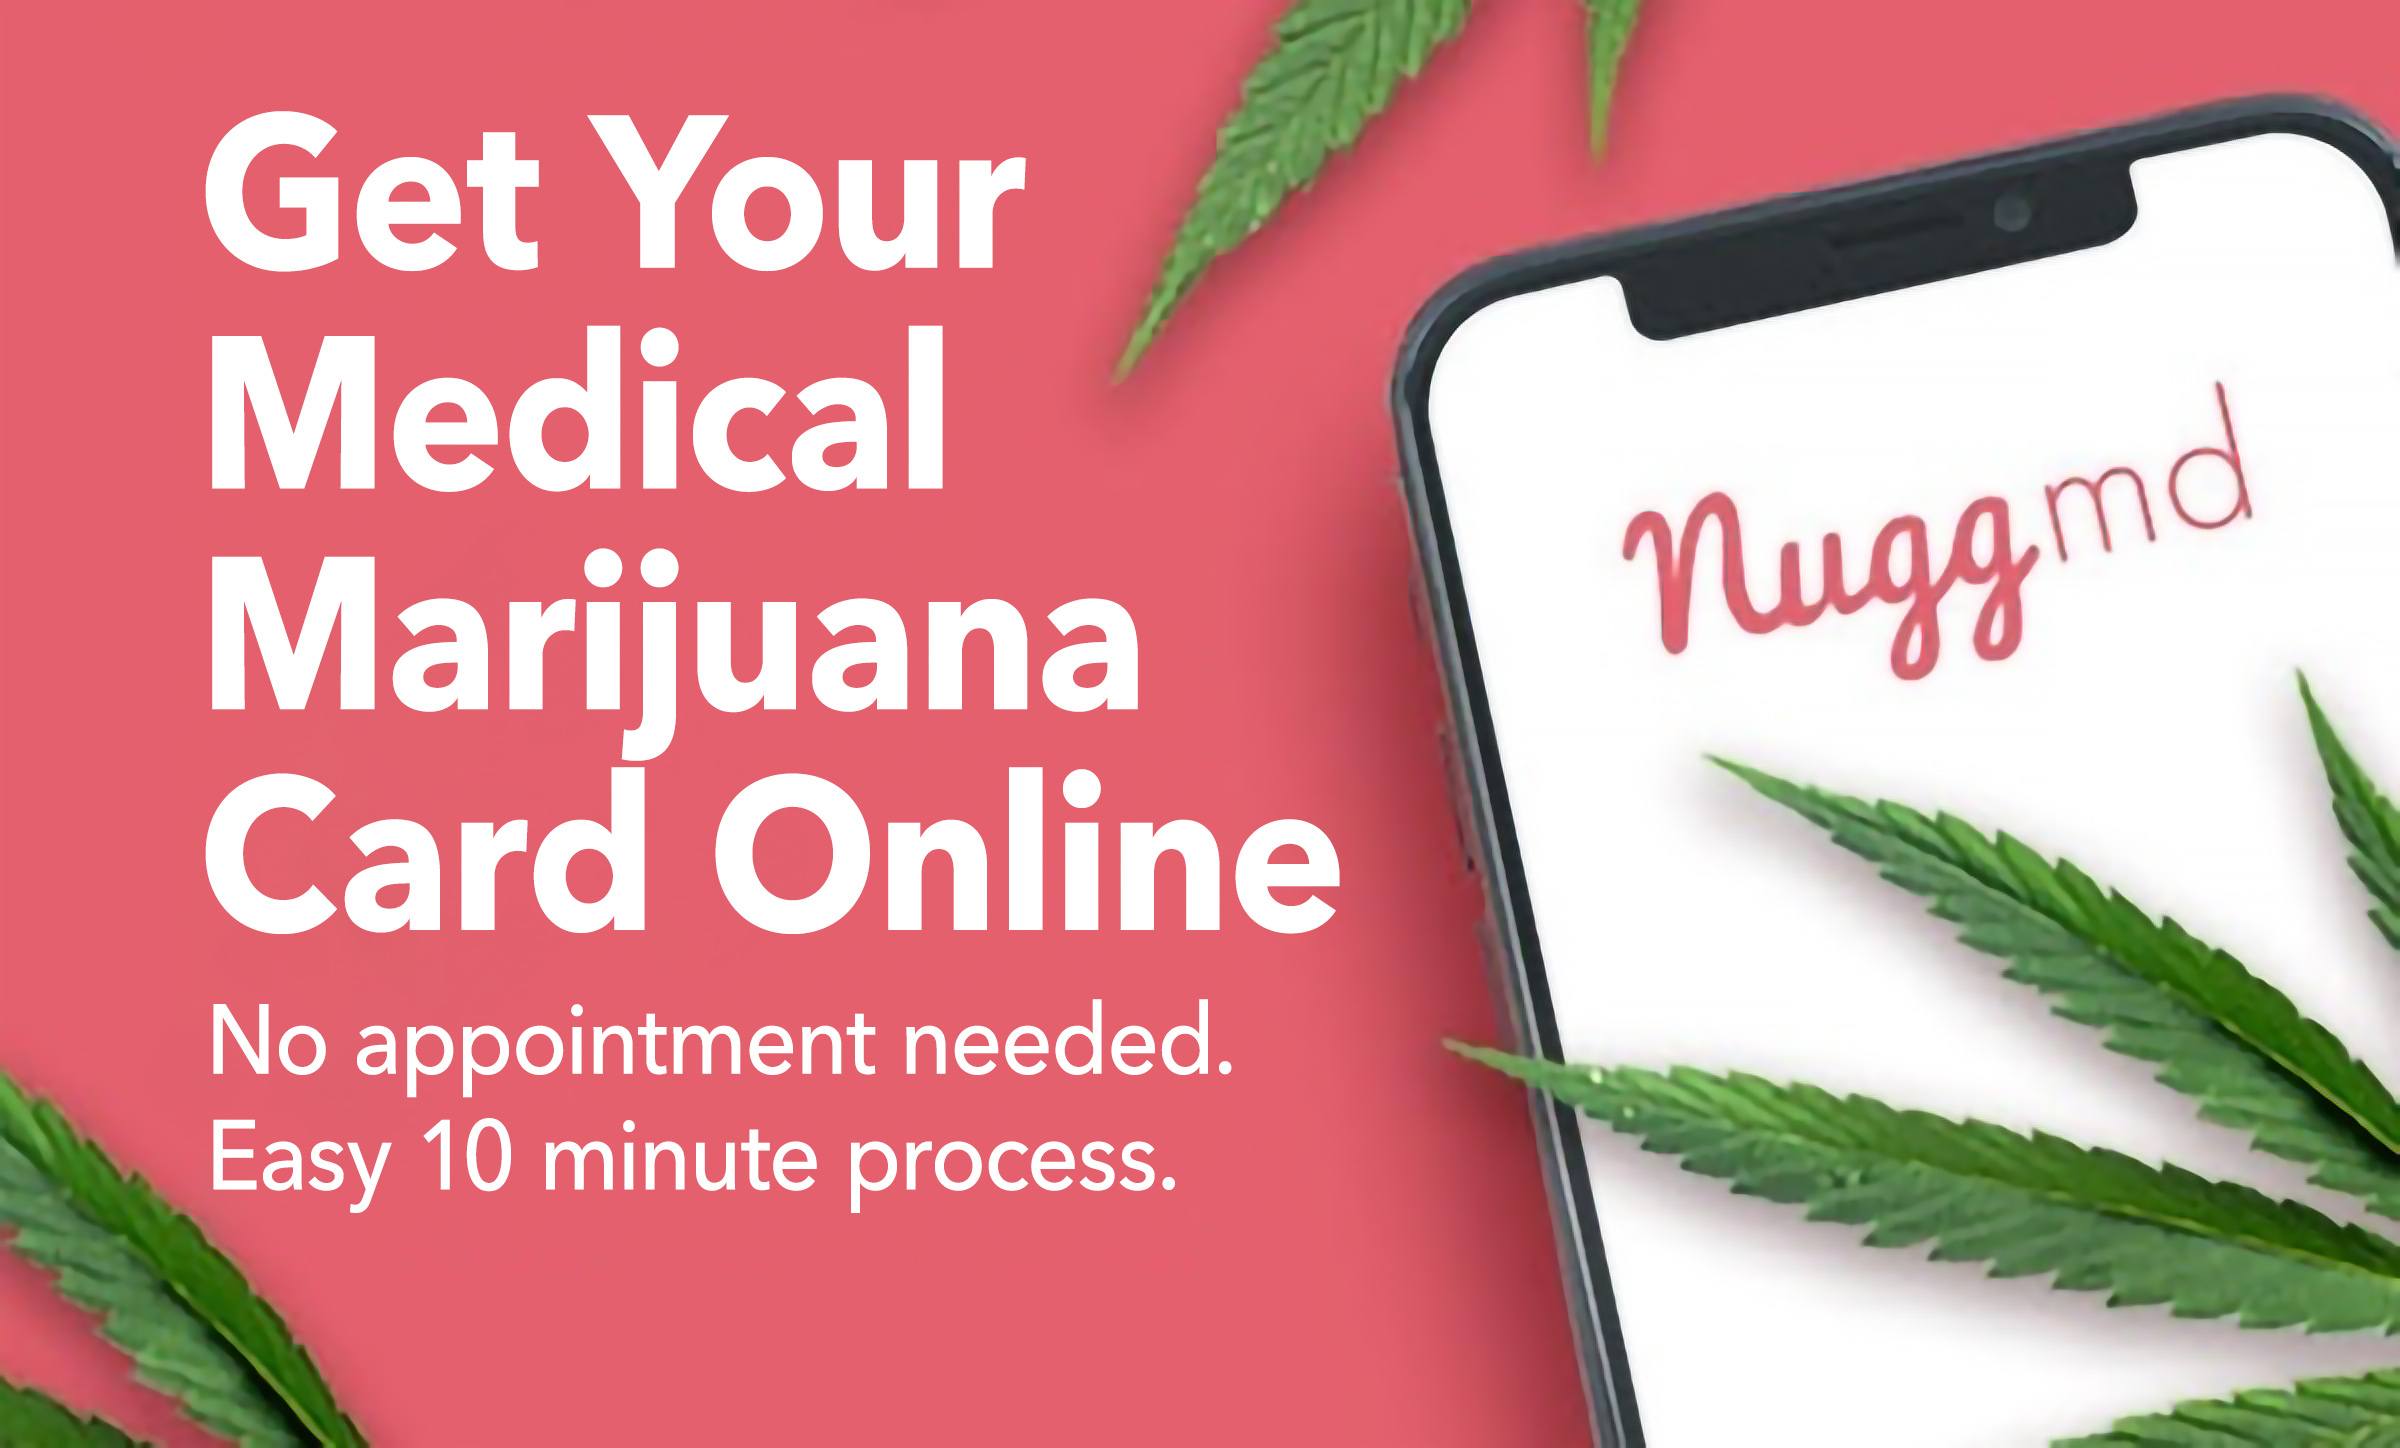 Get Your Medical Marijuana Card Online - No appointment needed. Easy 10 minute process.